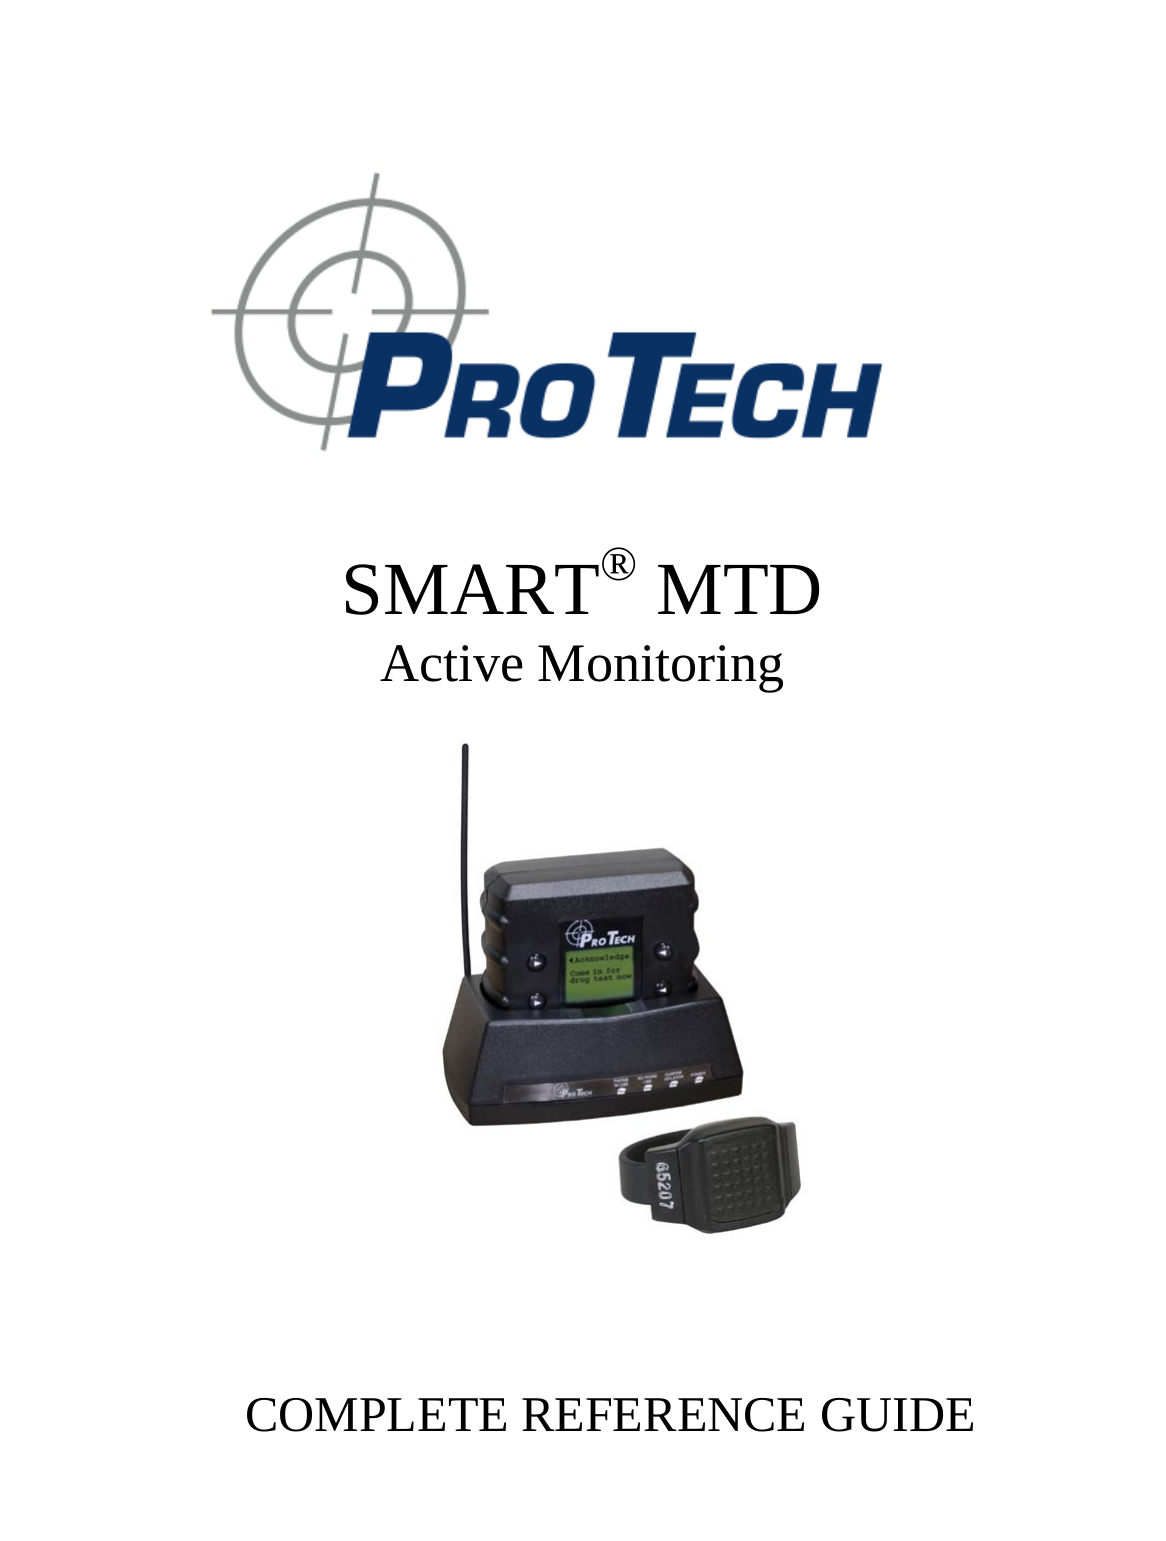                   SMART® MTD                                                Active Monitoring                         COMPLETE REFERENCE GUIDE 